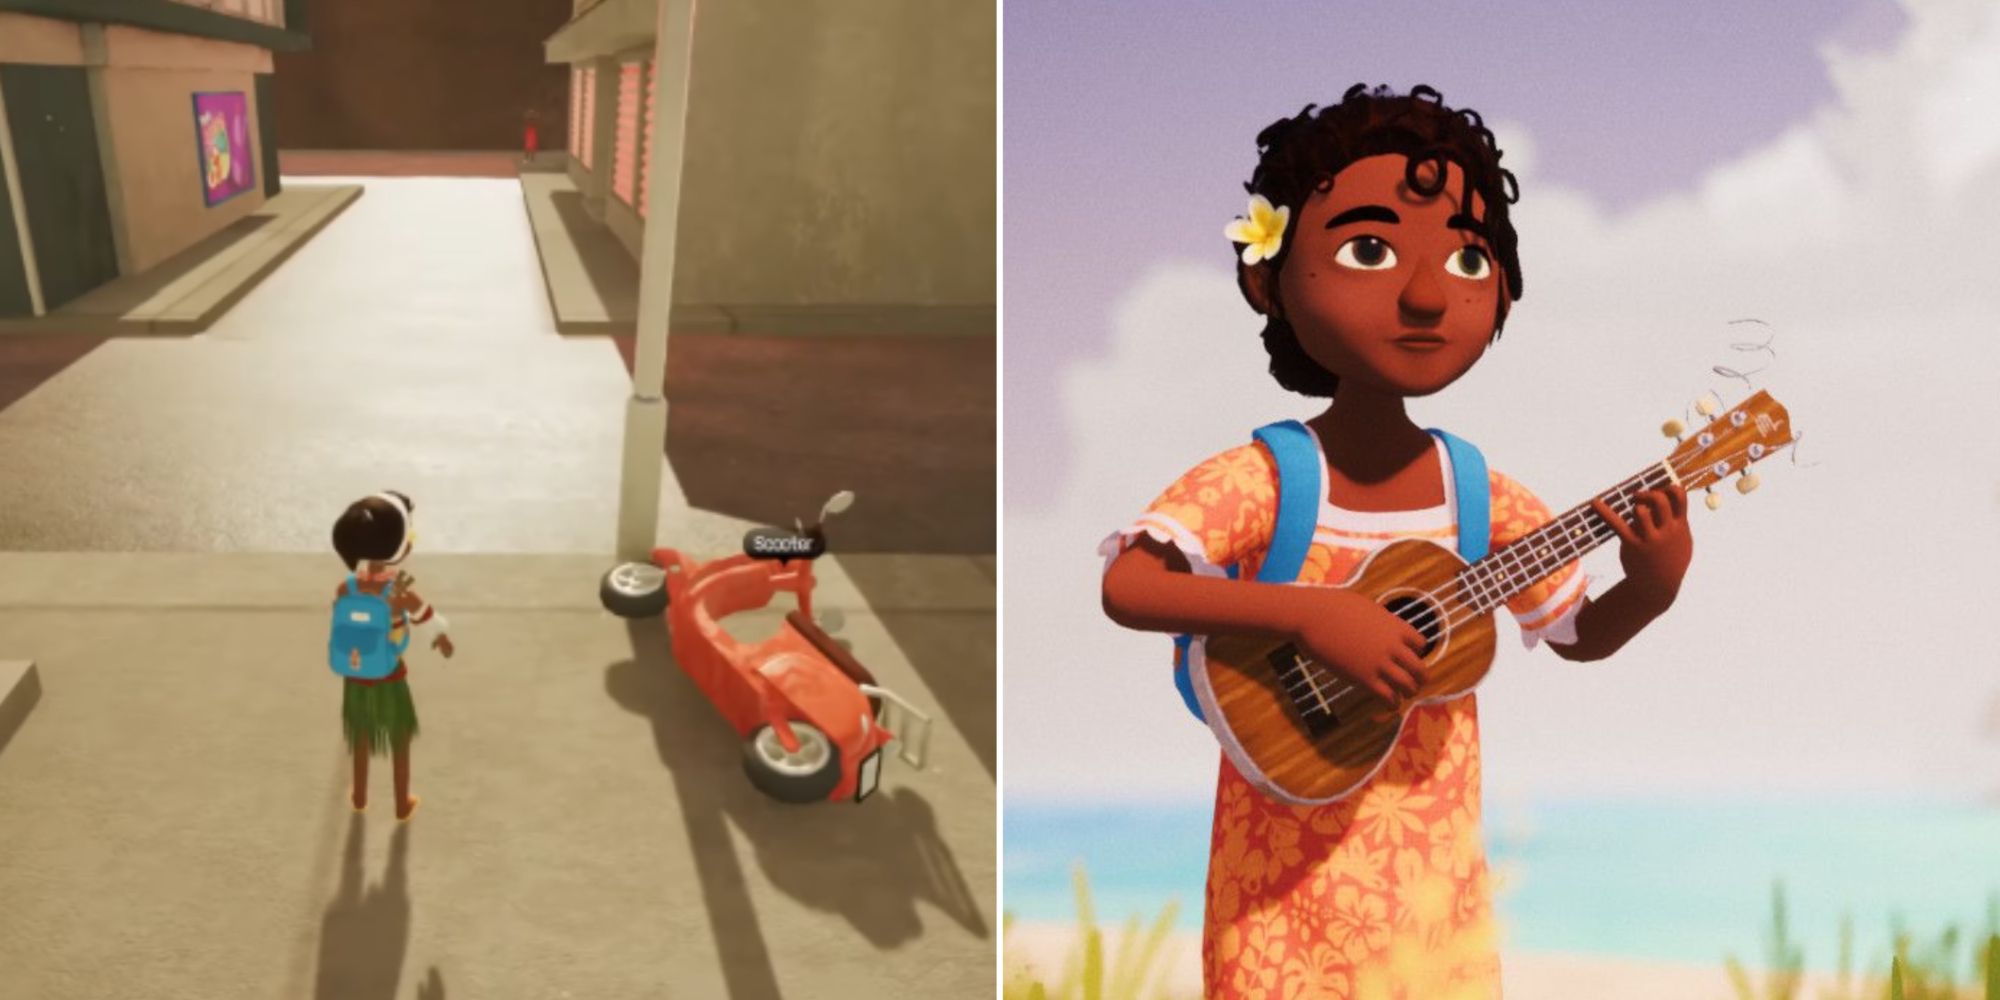 Tchia Featured Image With Her Next To A Scooter And Playing A Ukelele